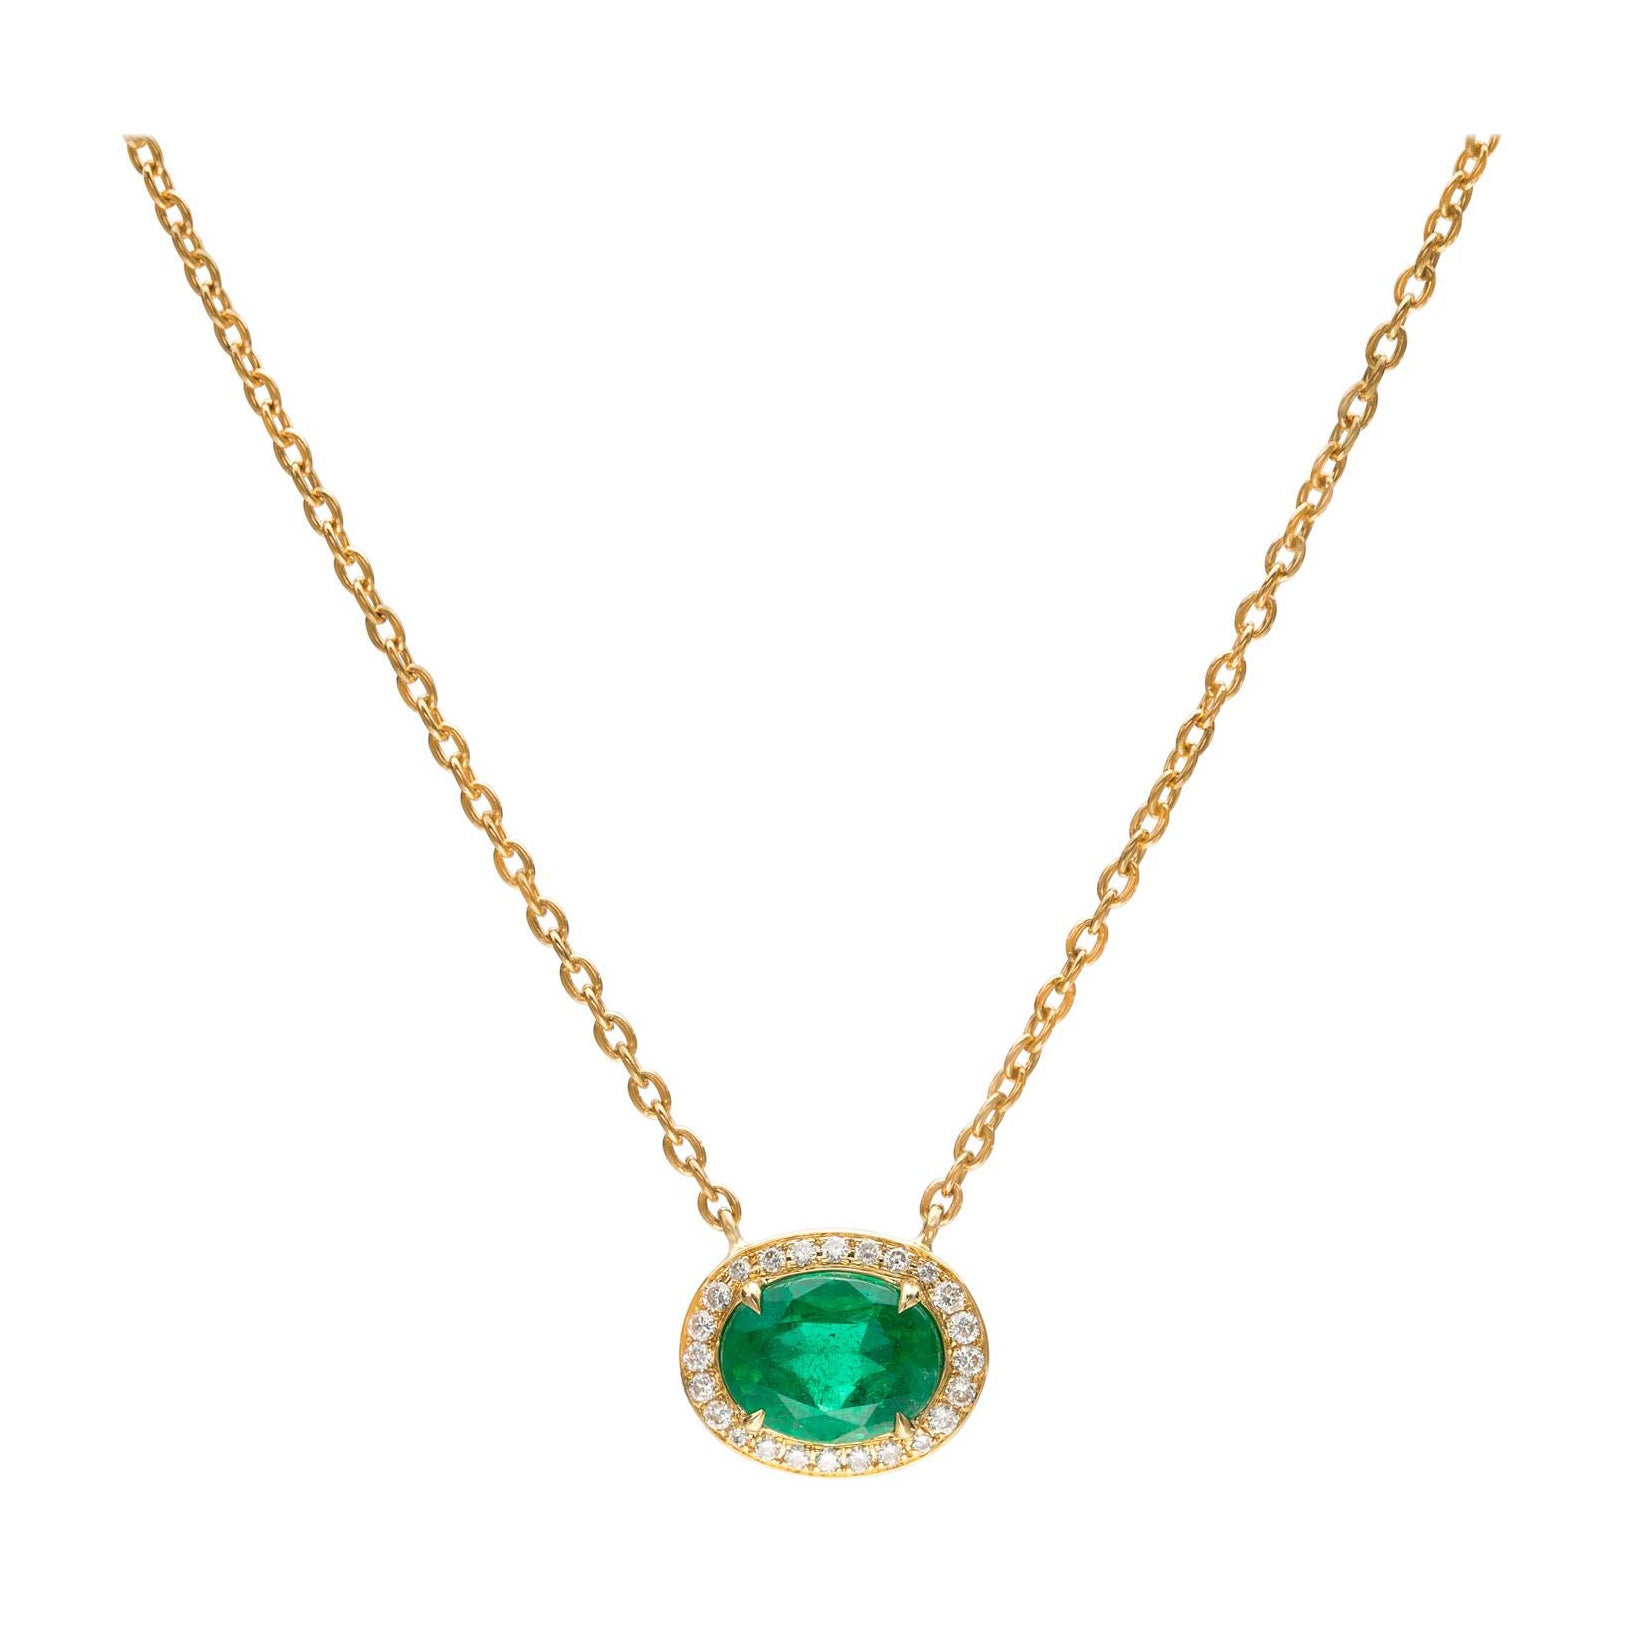 Emerald and Diamond Necklace by Salavetti